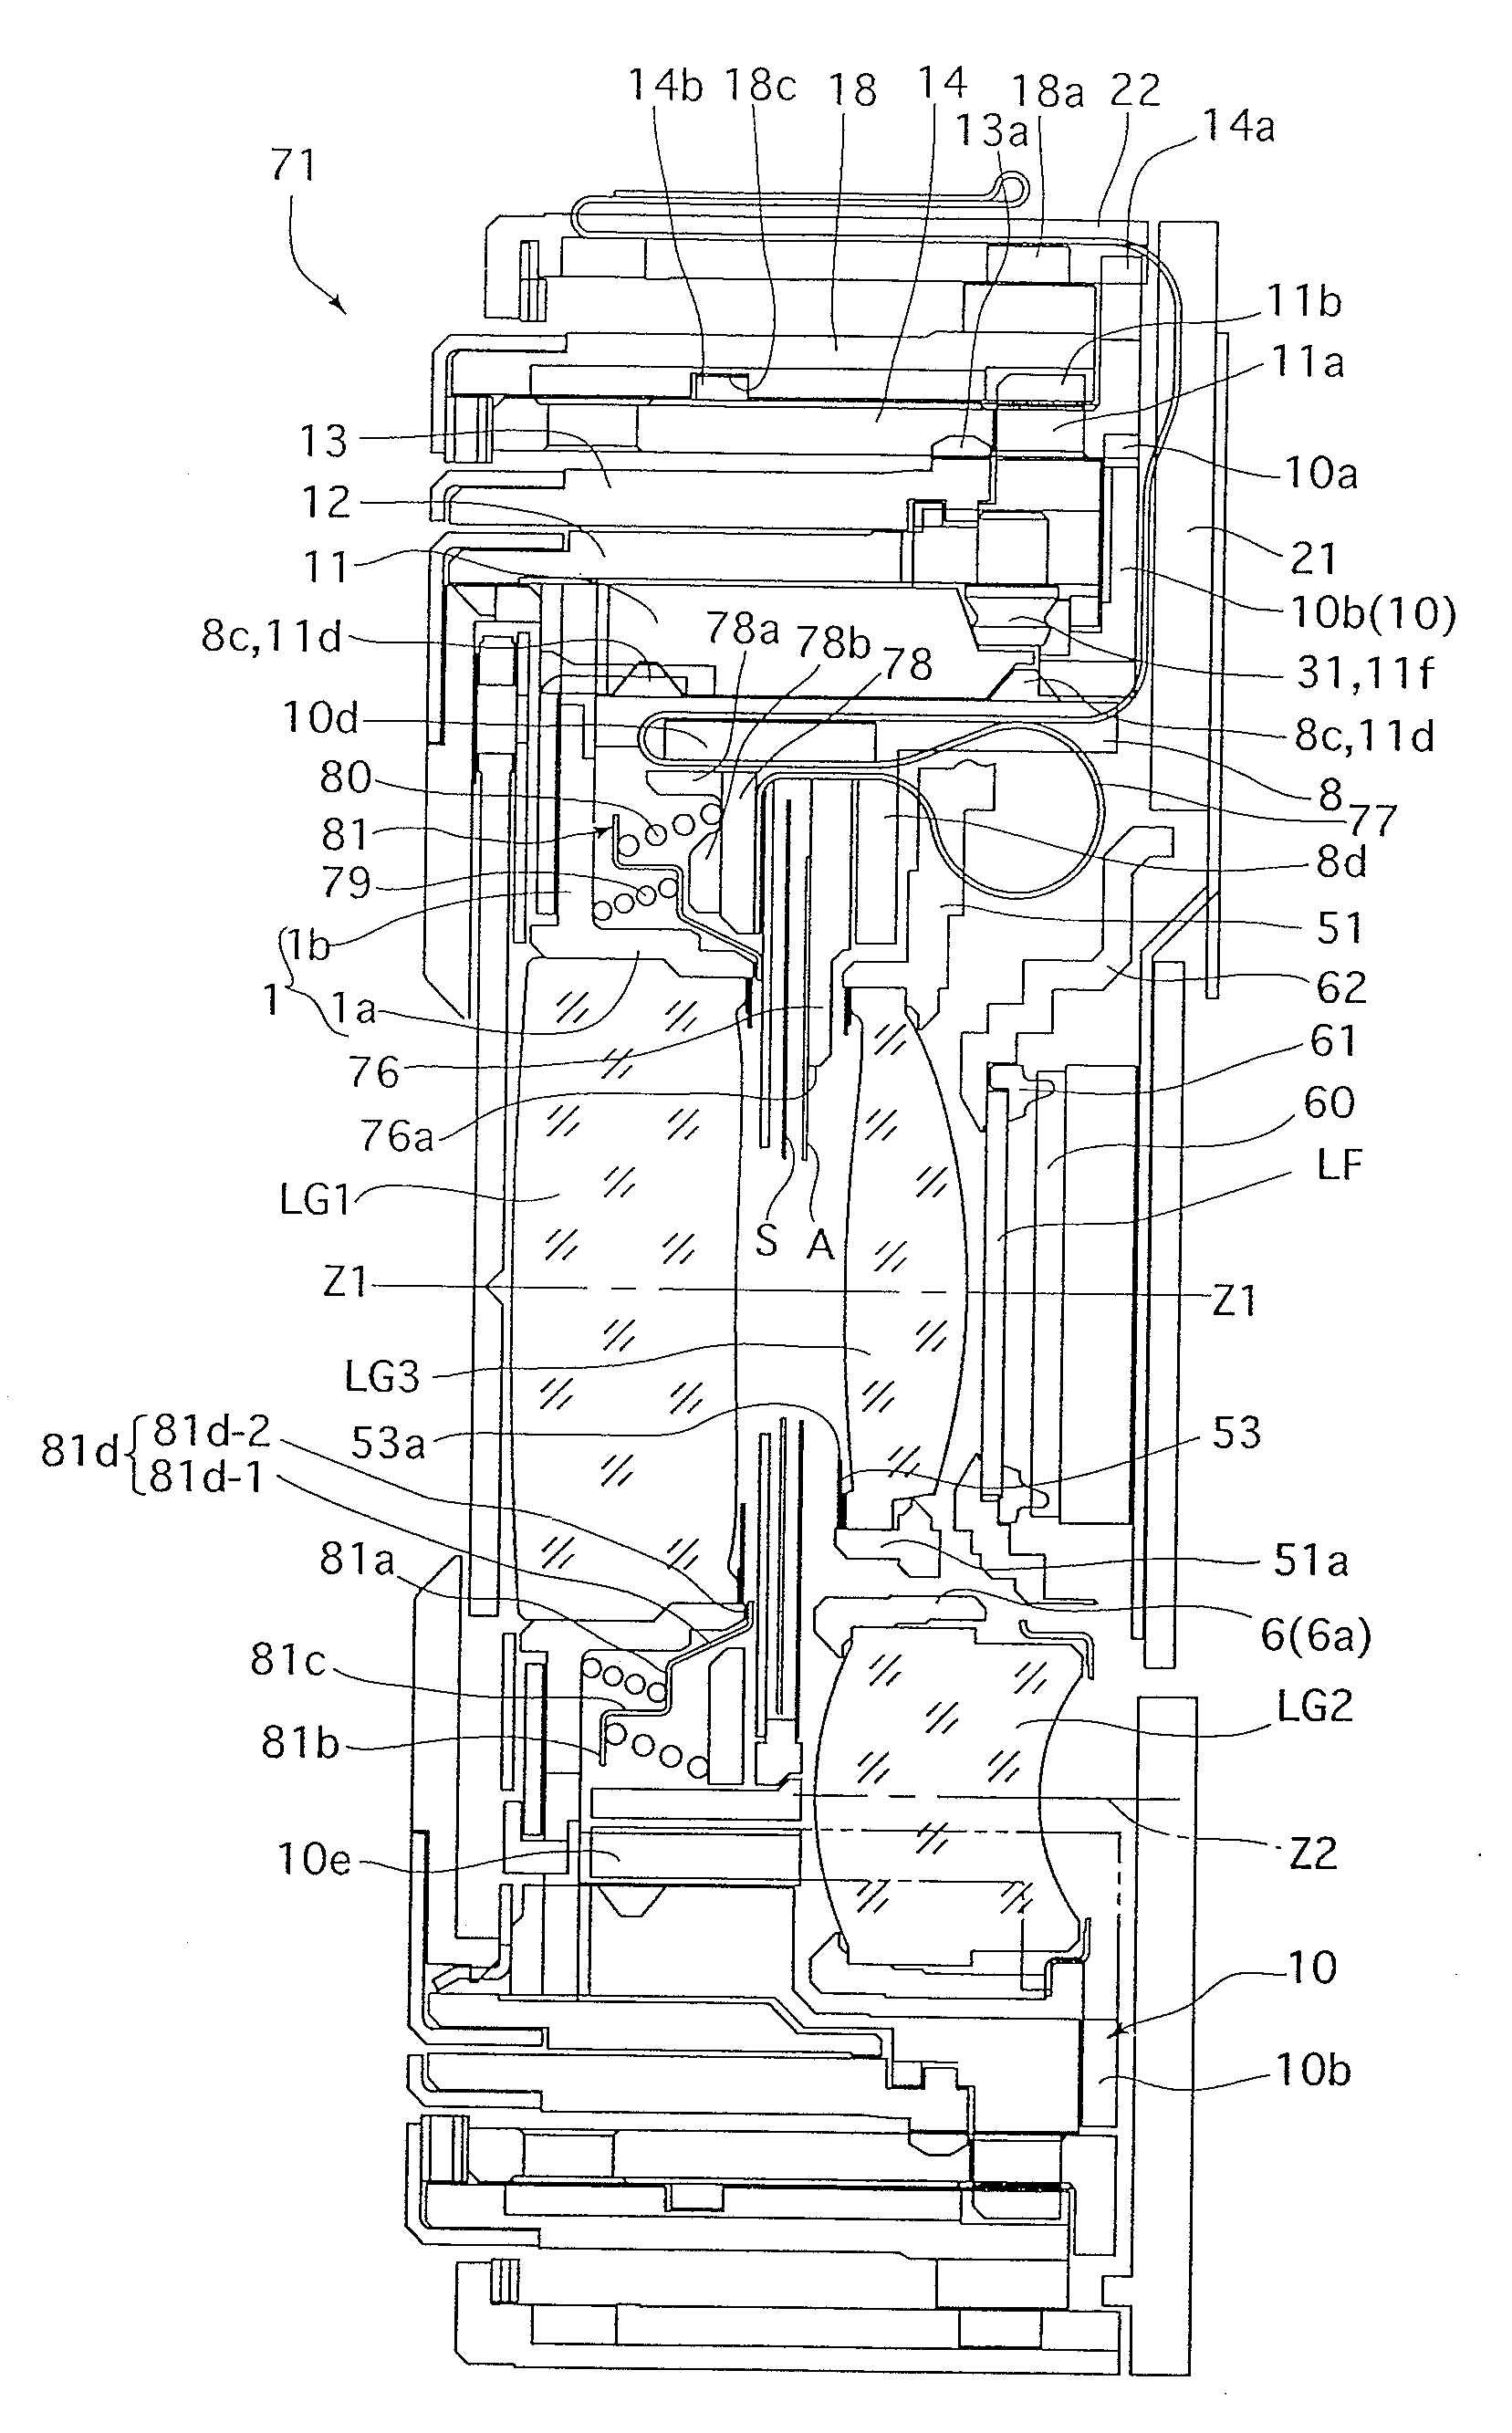 Light shieldling structure of an optical device